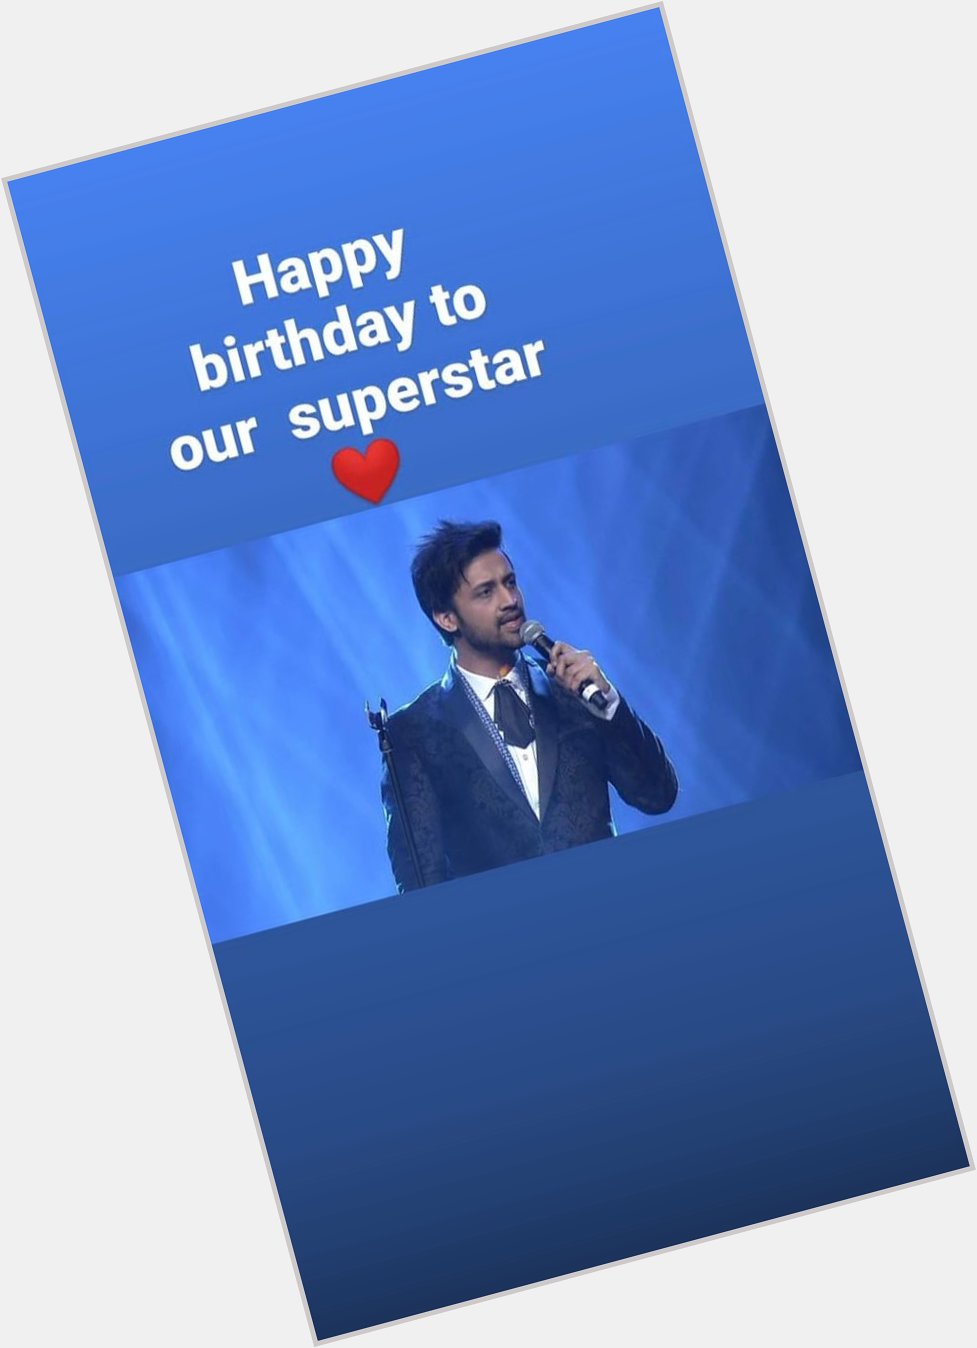  birthday to our superstar atif aslam 